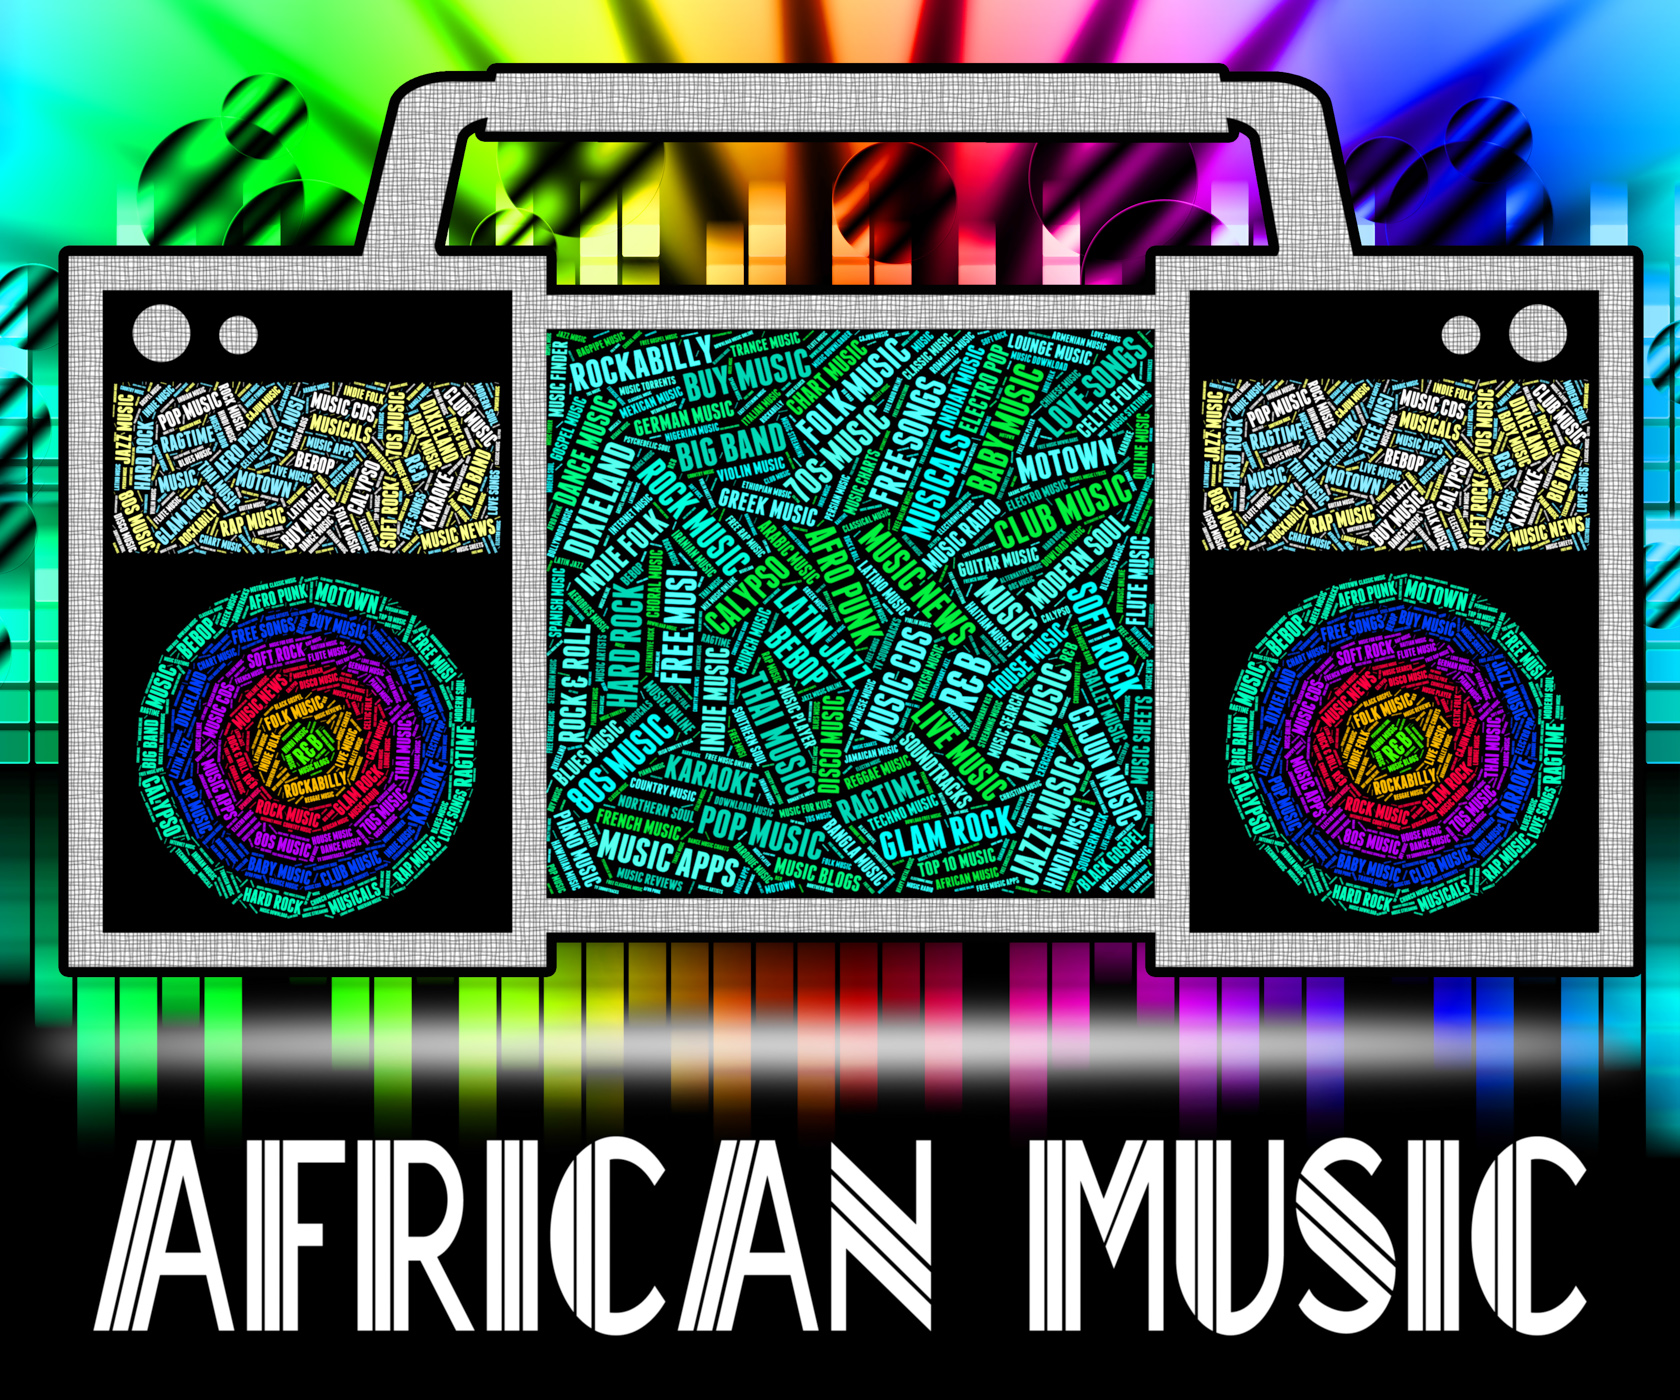 African music shows sound tracks and acoustic photo